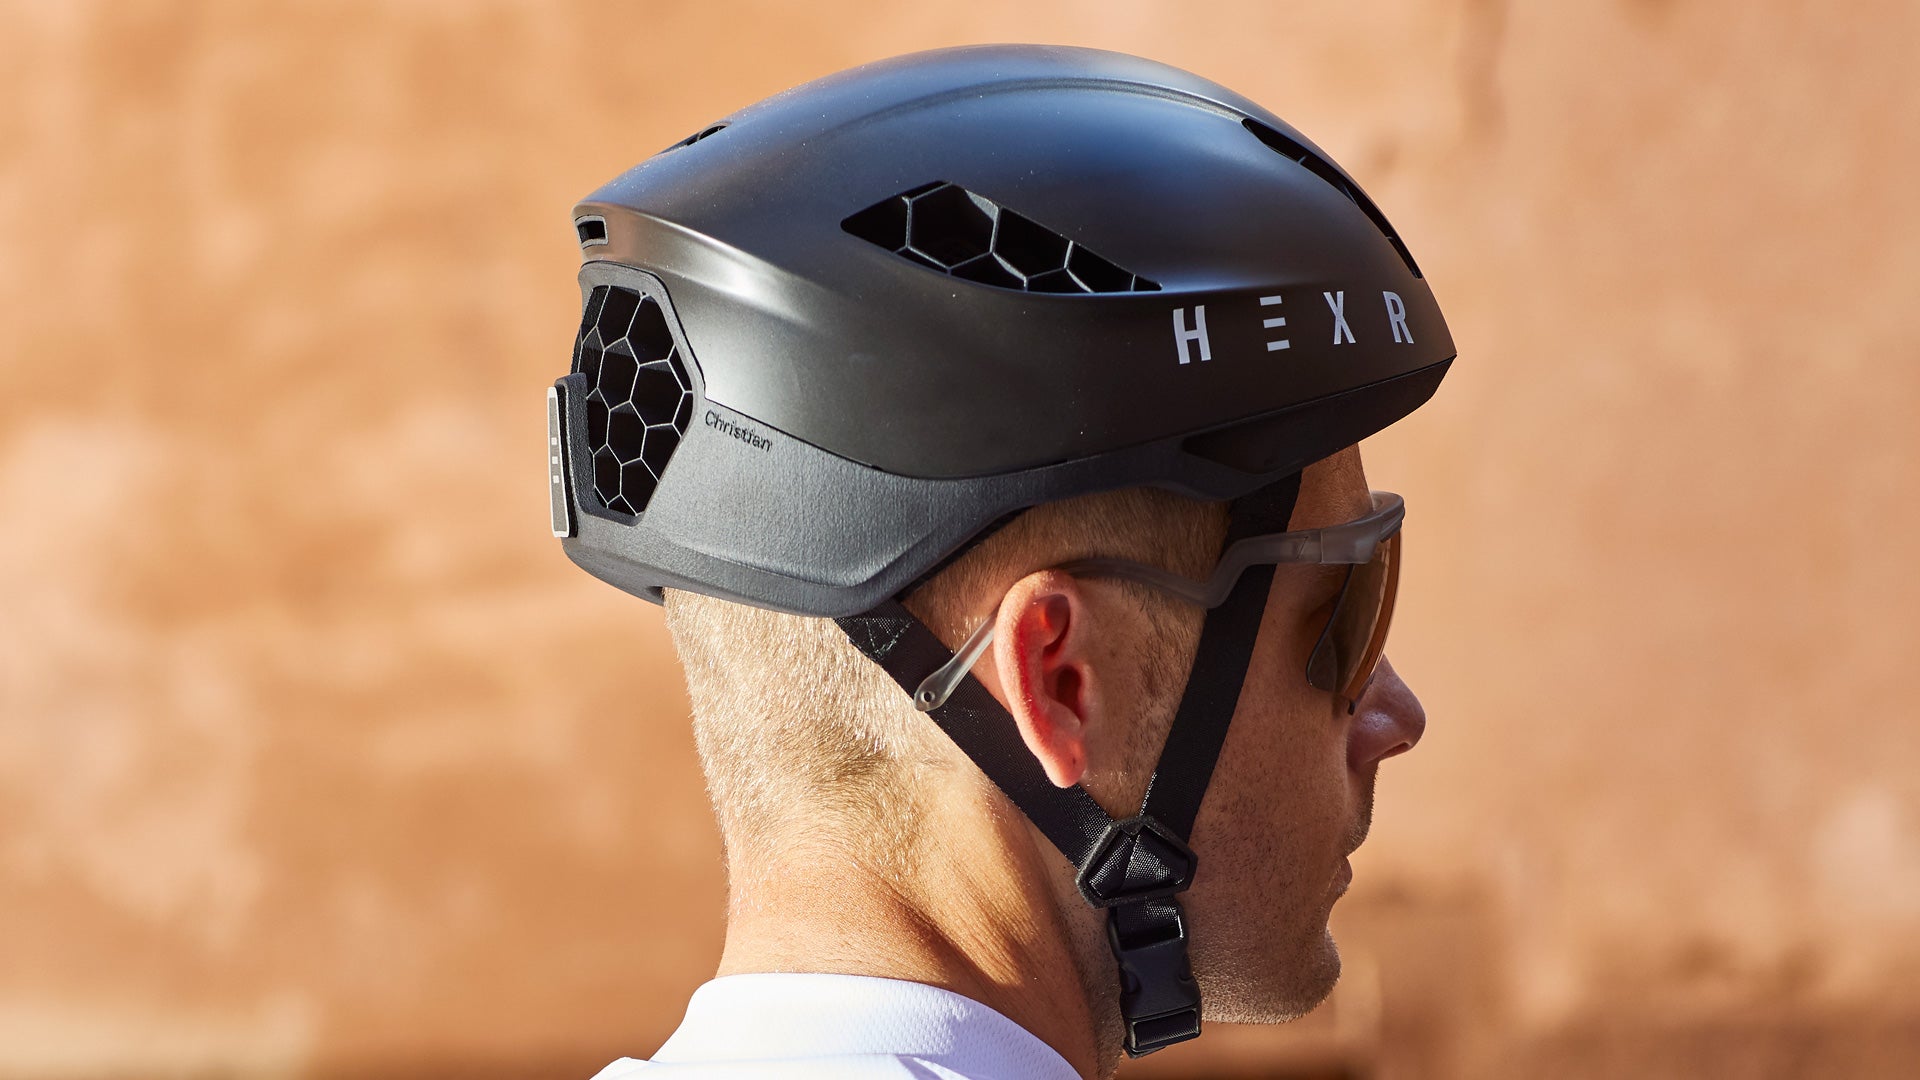 View of the HEXR helmet from the back.